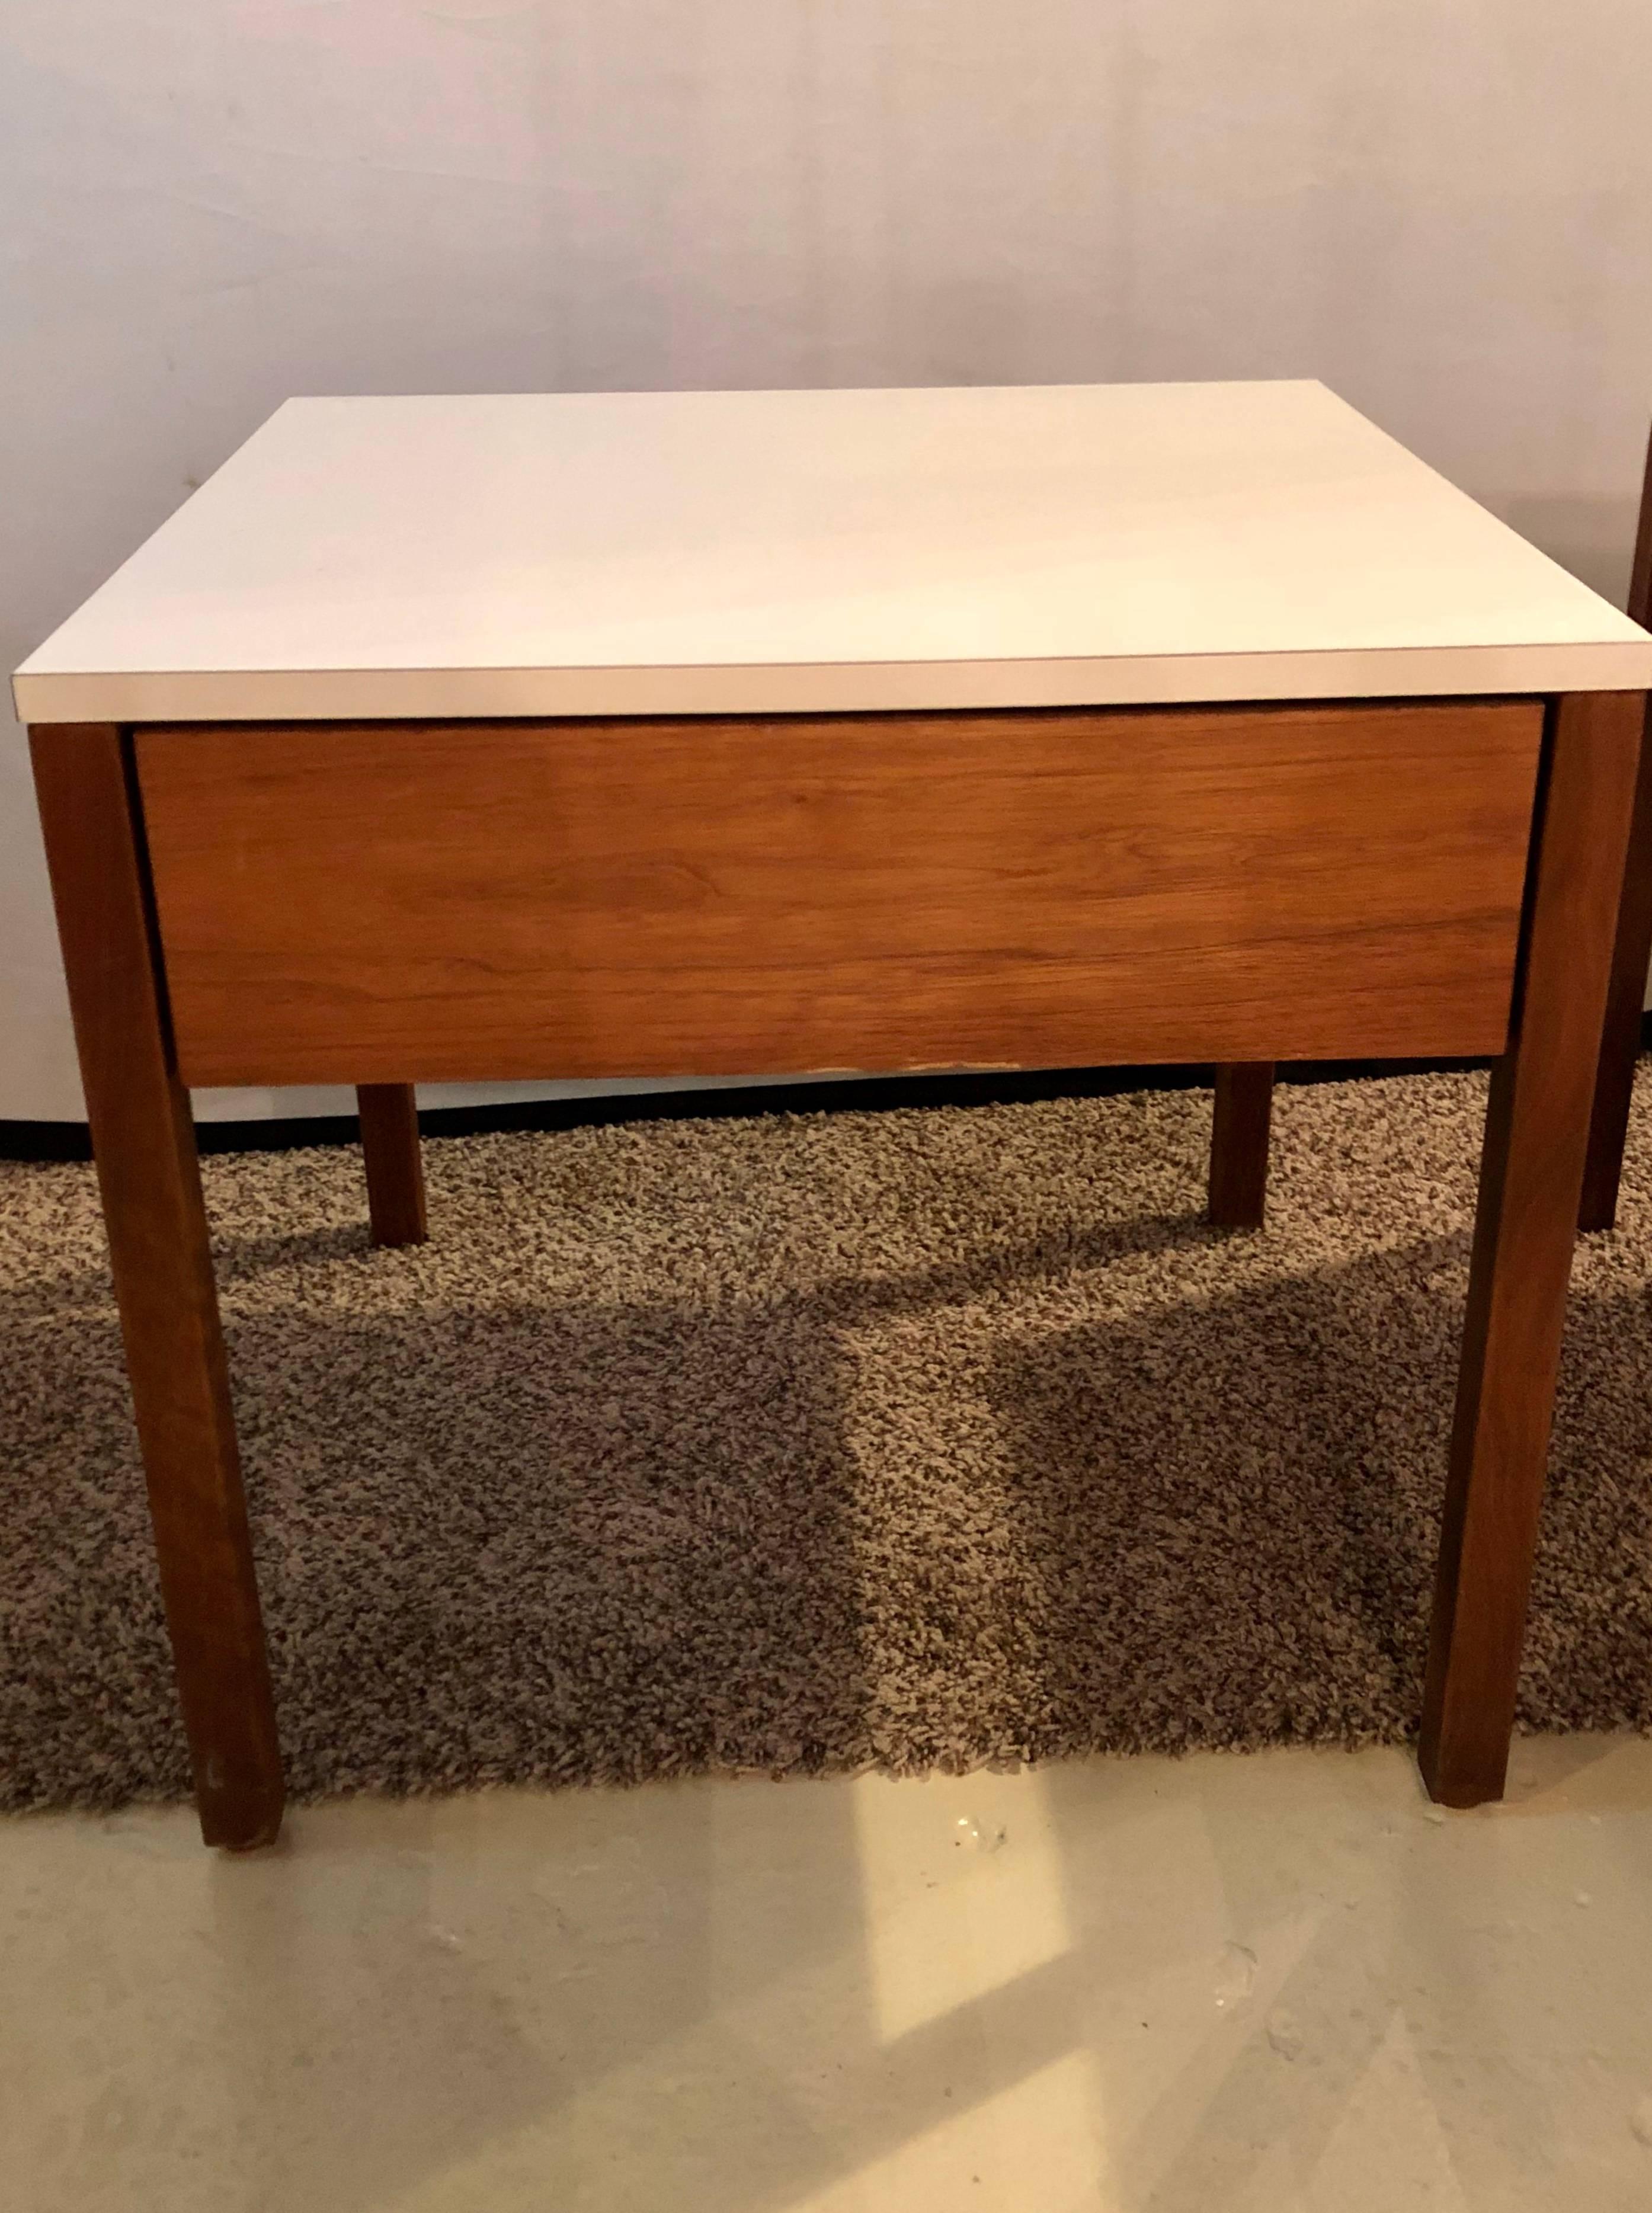 A pair of Mid-Century Modern signed Florence Knoll nightstands or end tables. Each of these fine custom quality walnut chrome stands have a single drawer under a white laminate top. Both are labeled on the underside. This fine pair have a matching